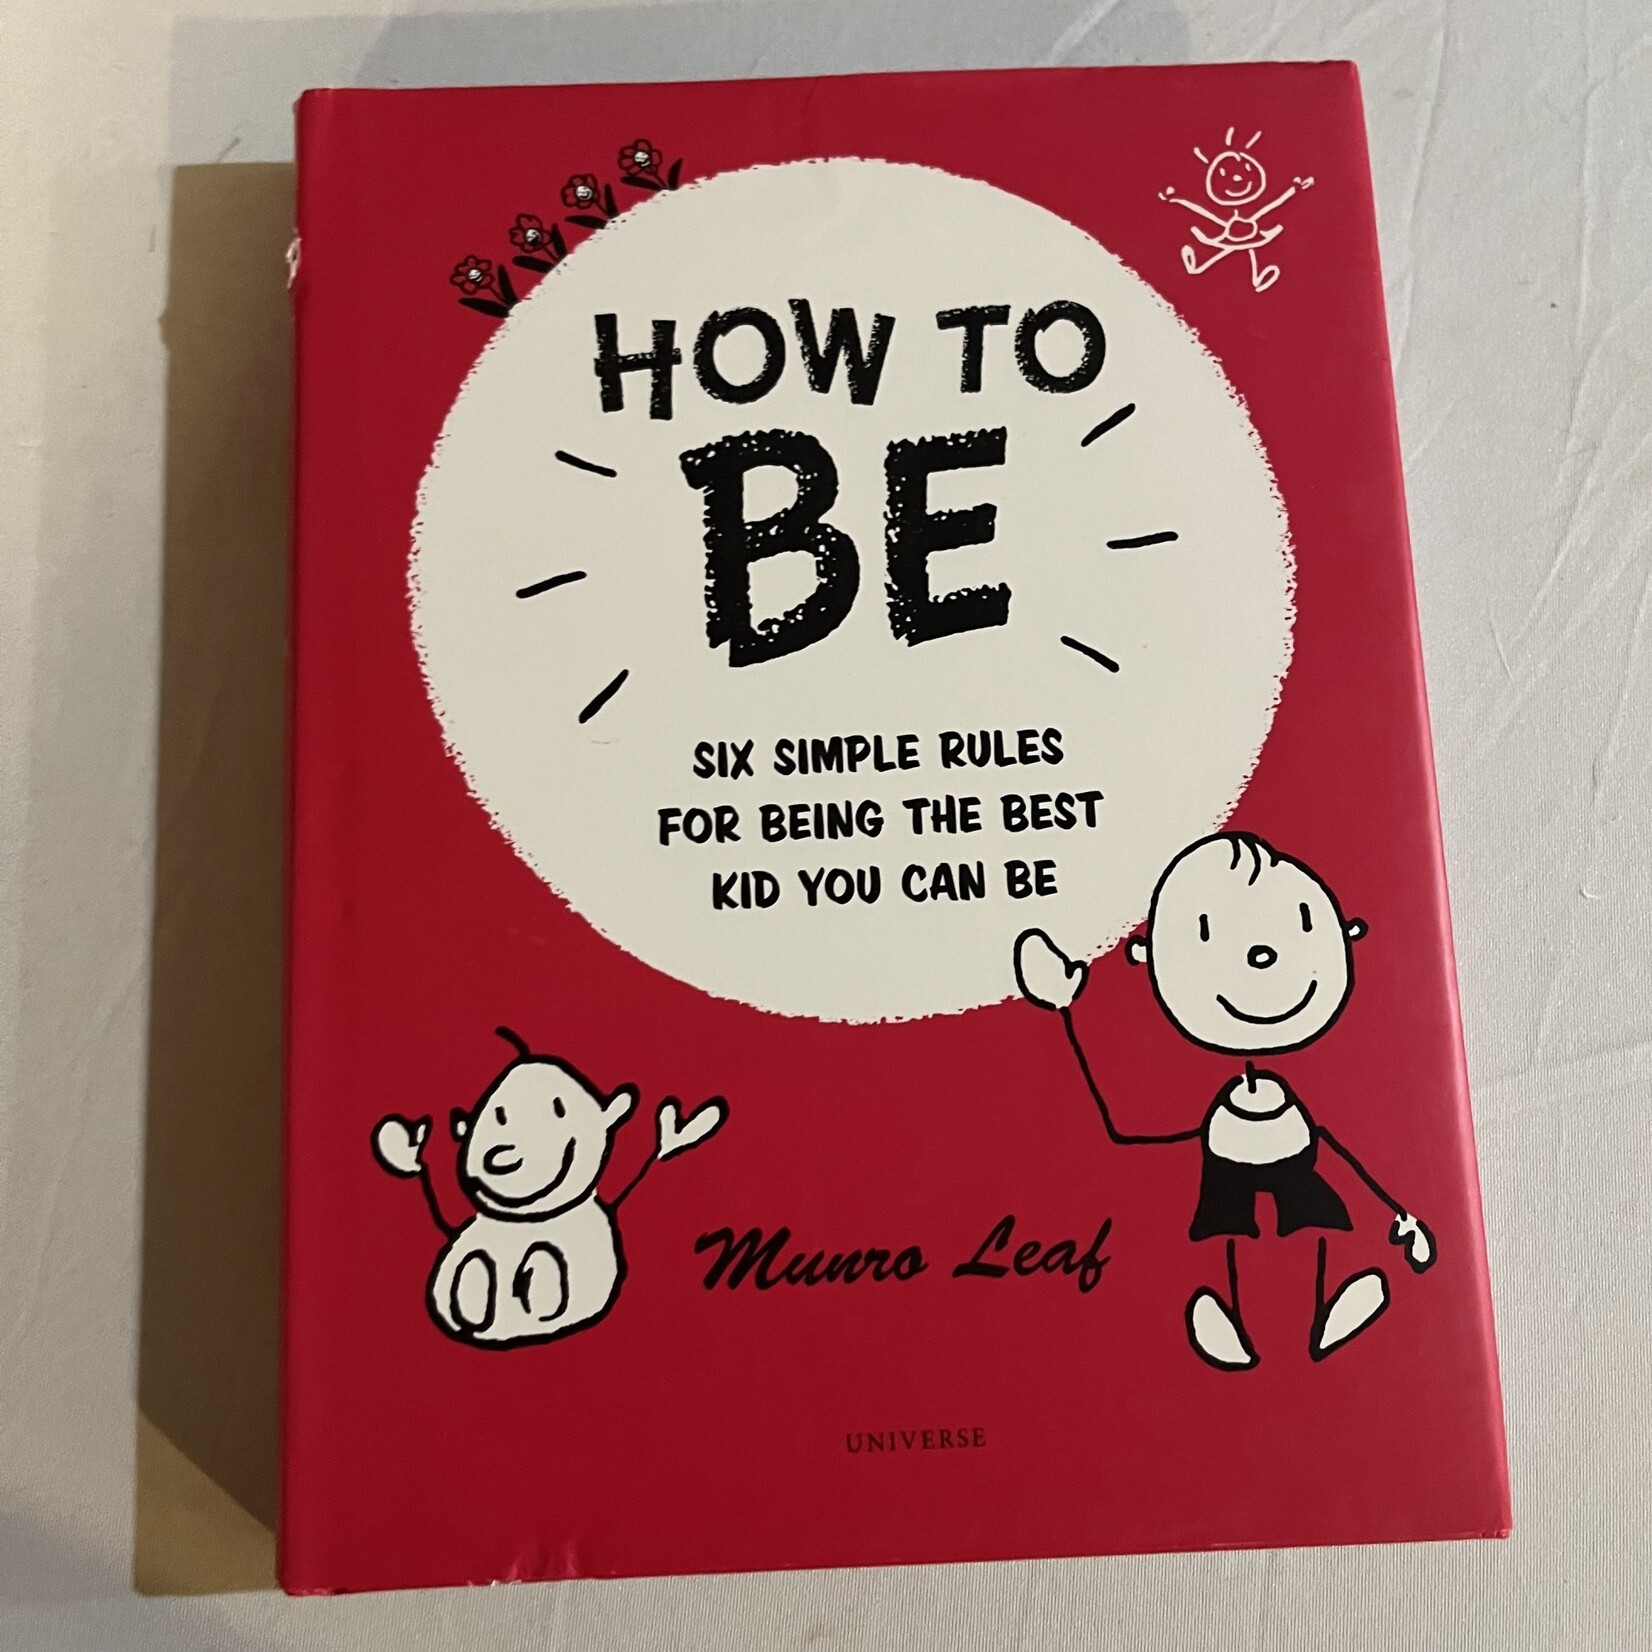 How to Be - Six Simple Rules For Being the Best Kid You Can Be